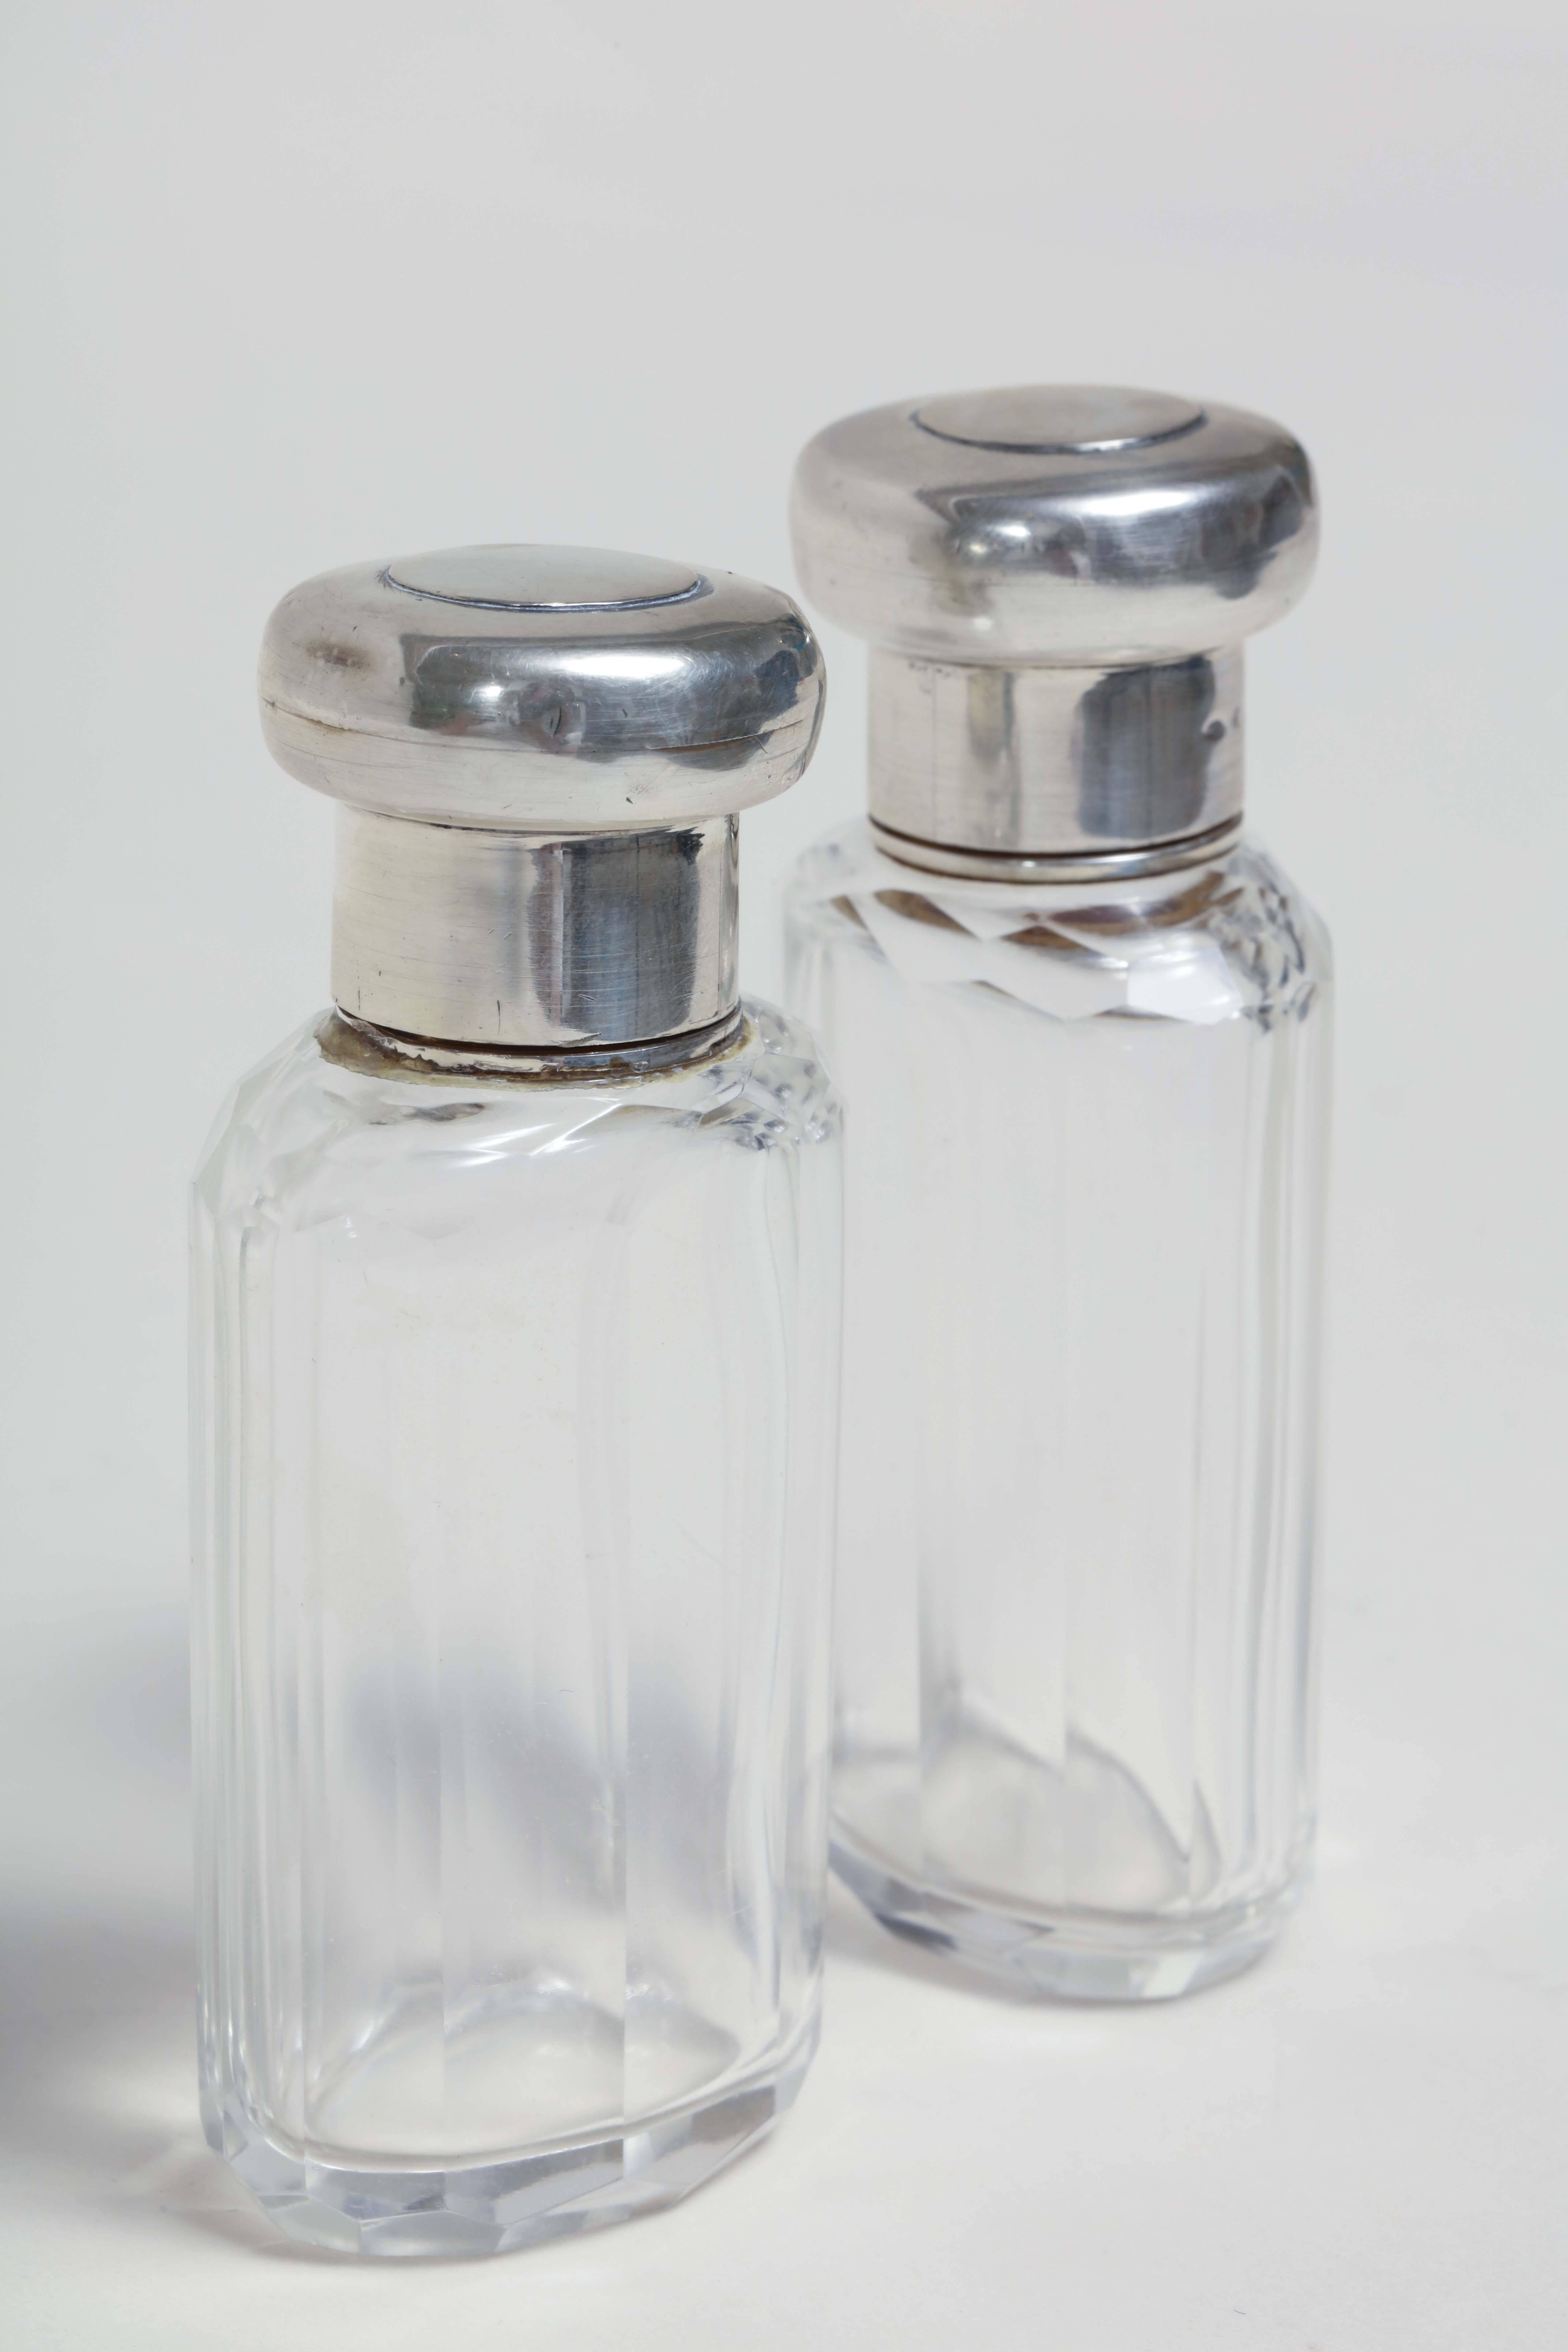 K.B. & Co. English Art Deco Pair of Crystal & Sterling Silver Scent Bottles 1